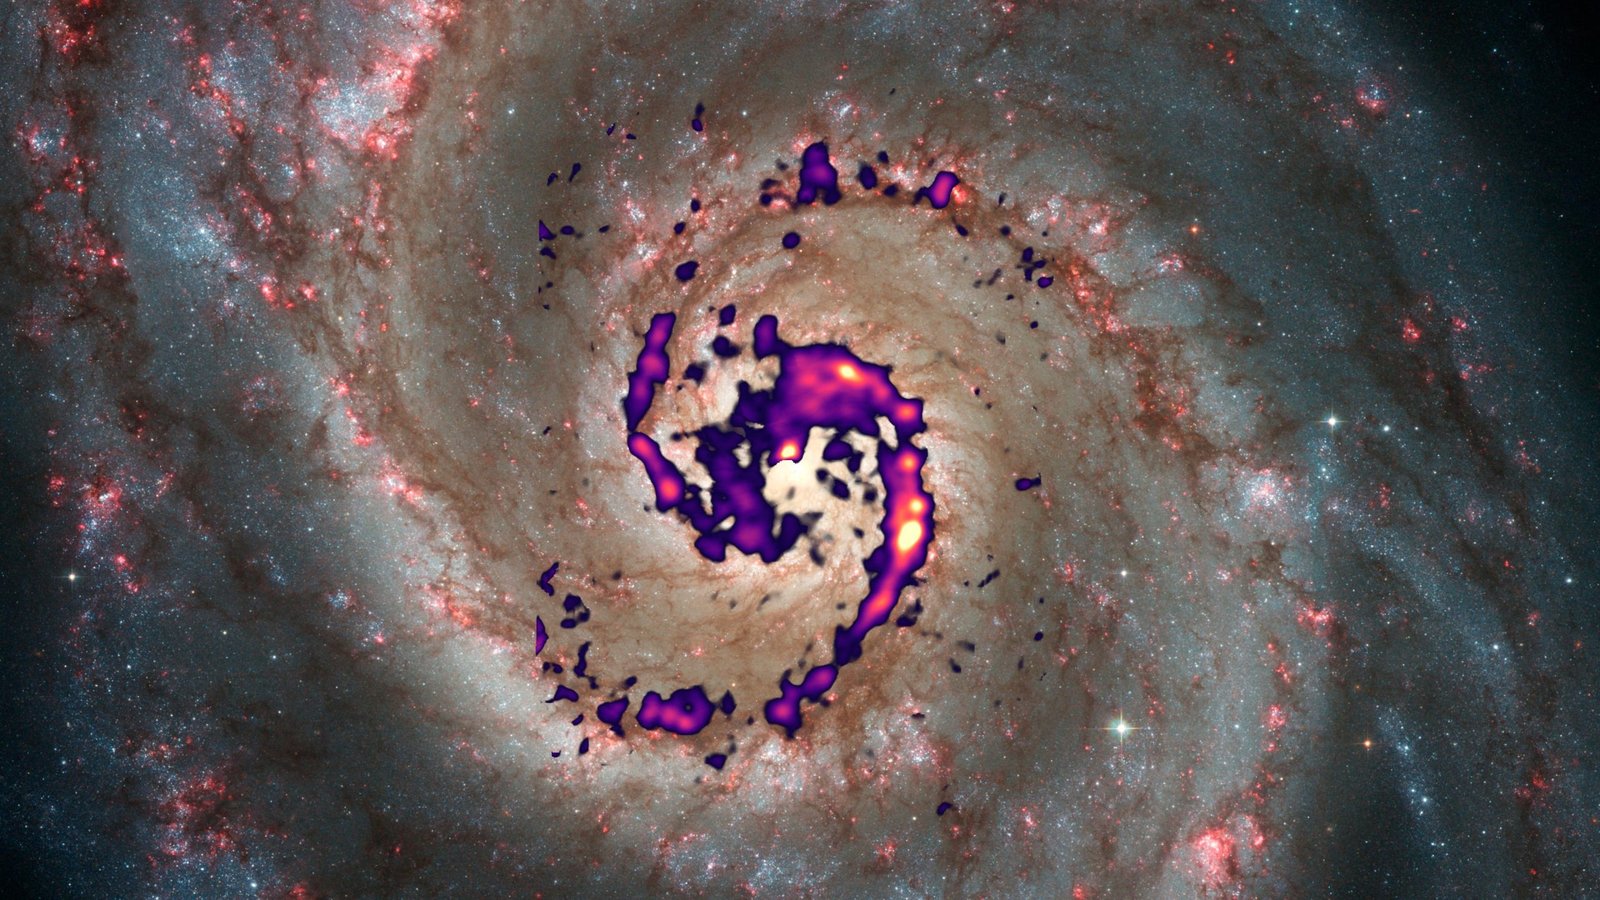 Unraveling the Mysteries of Star Creation in the Whirlpool Galaxy